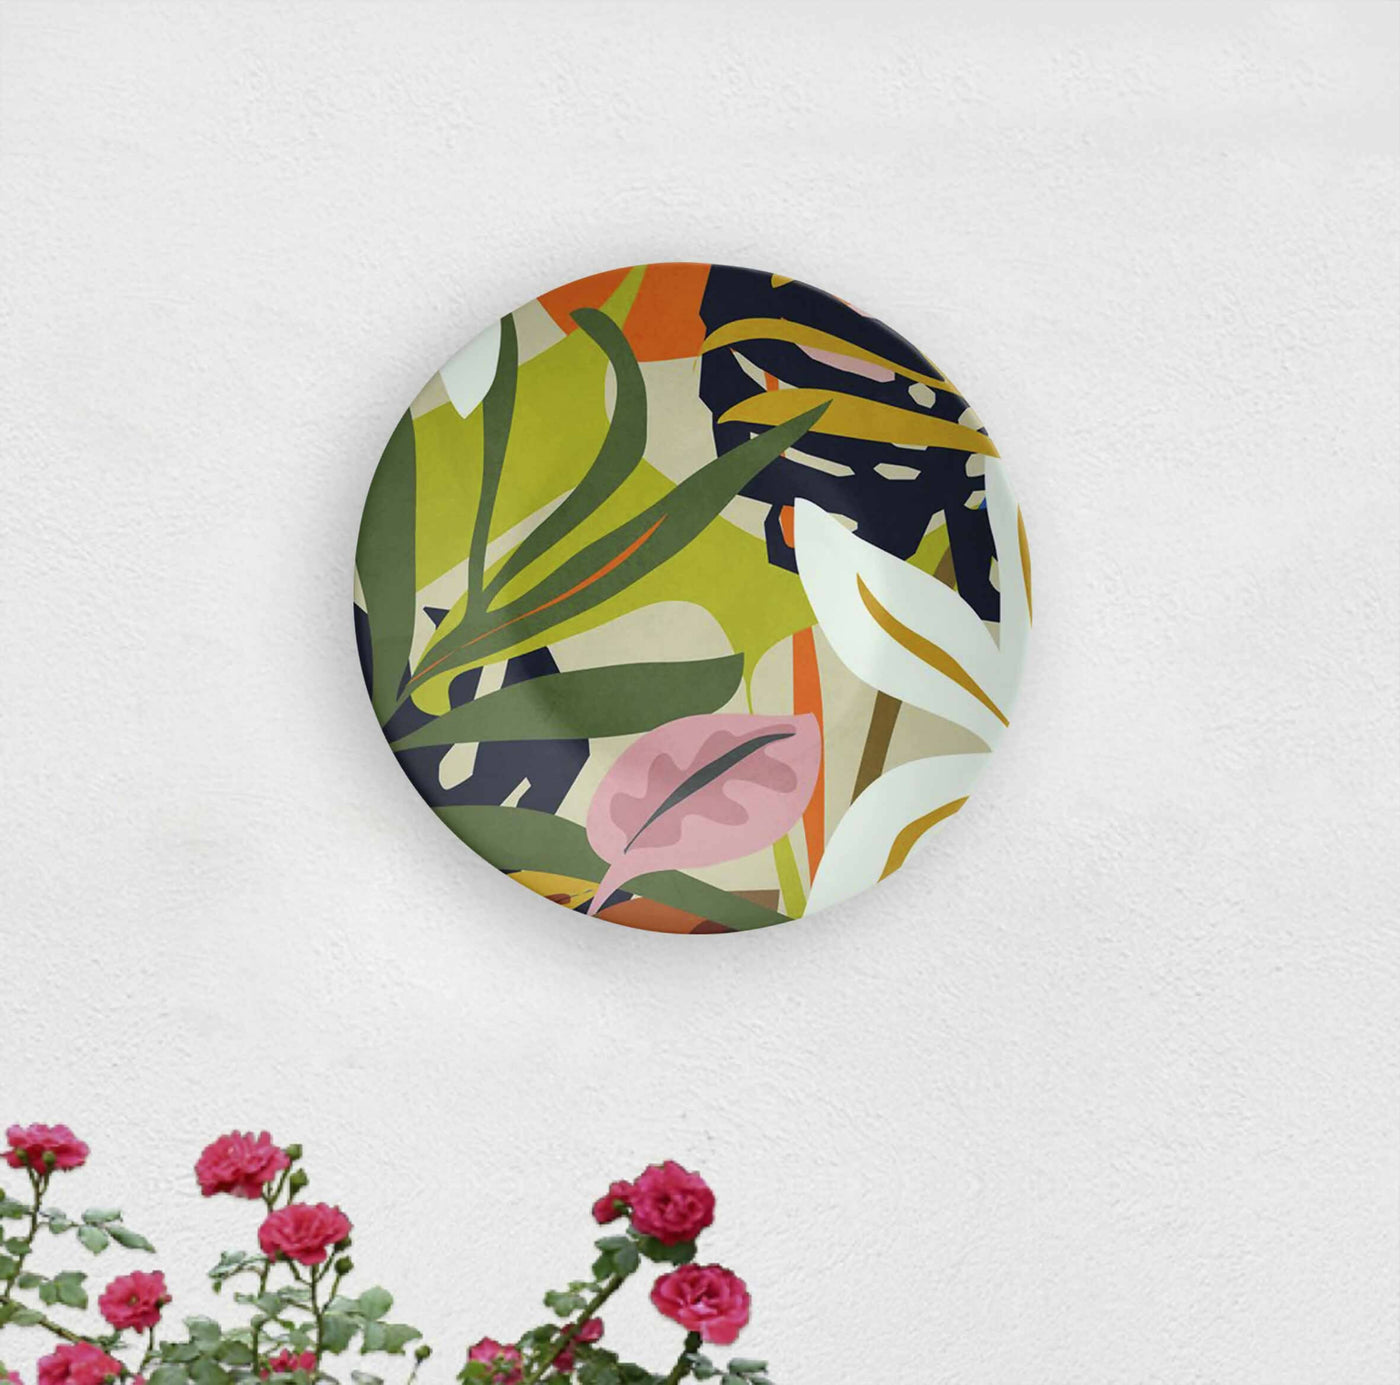 American Artistic Abstract Decorative Wall Plate - Wall Decor - 1